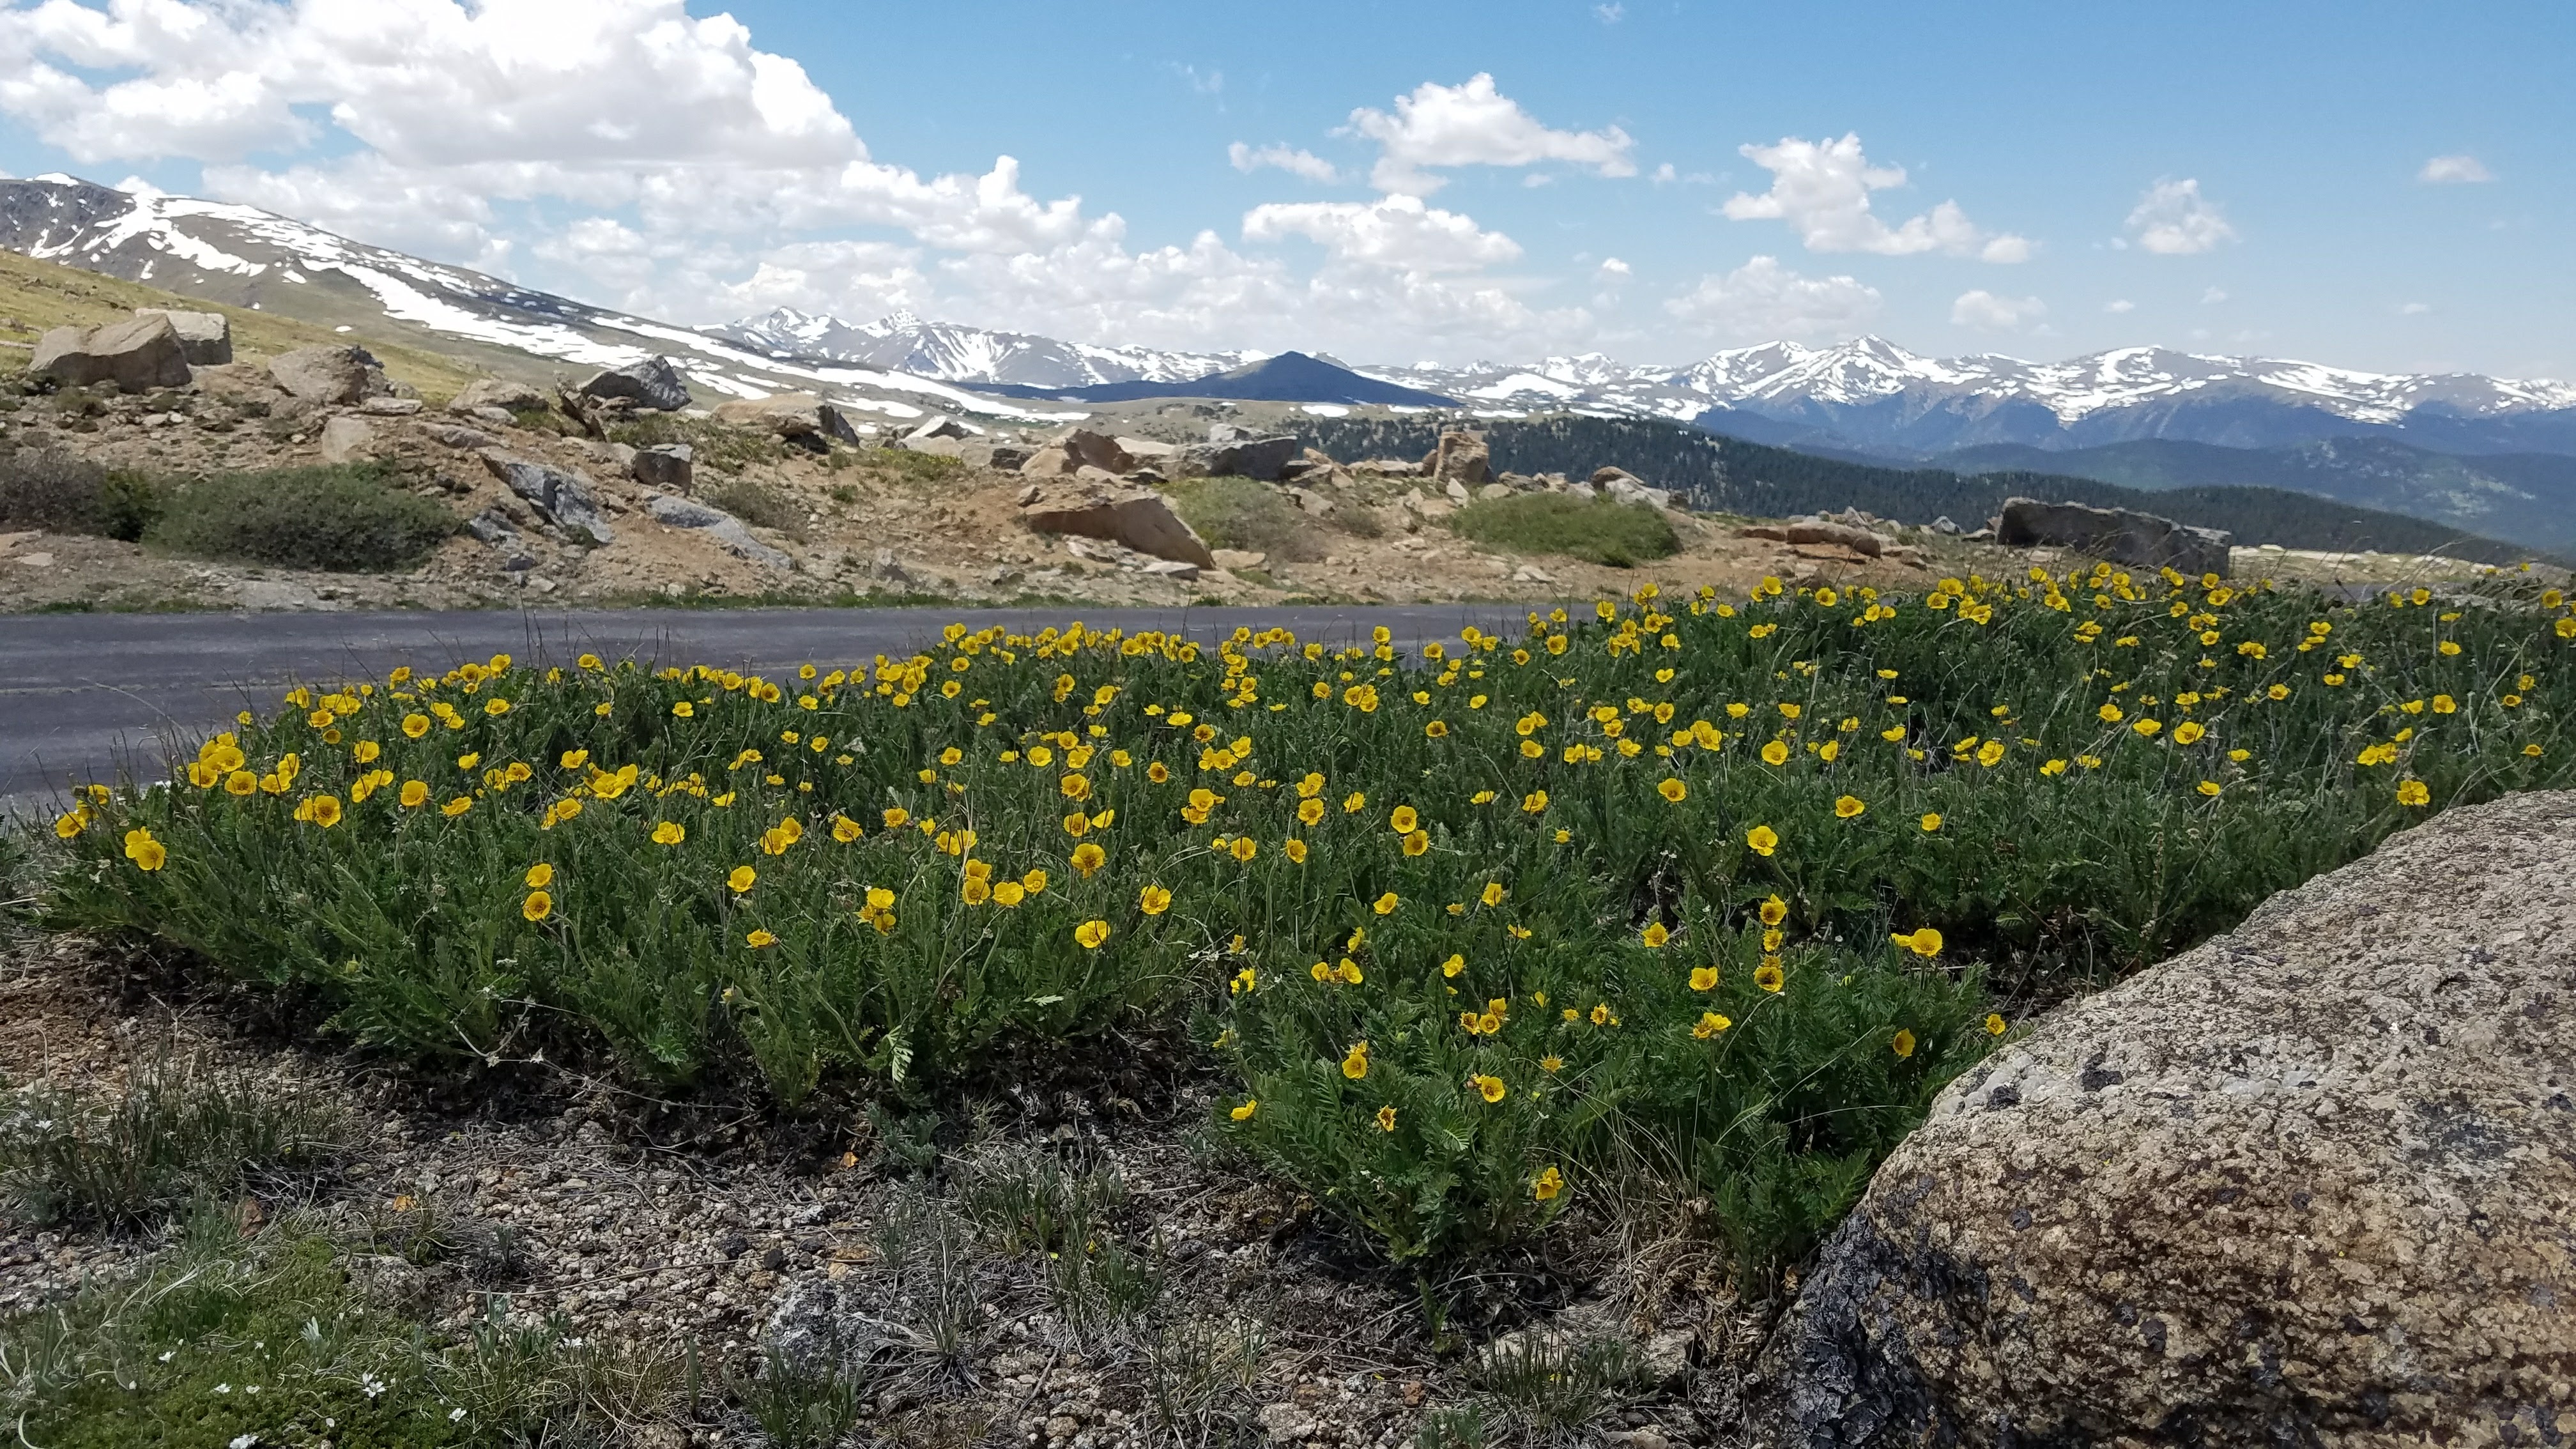 Colorado is the best for its scenic drives - Mount Evans